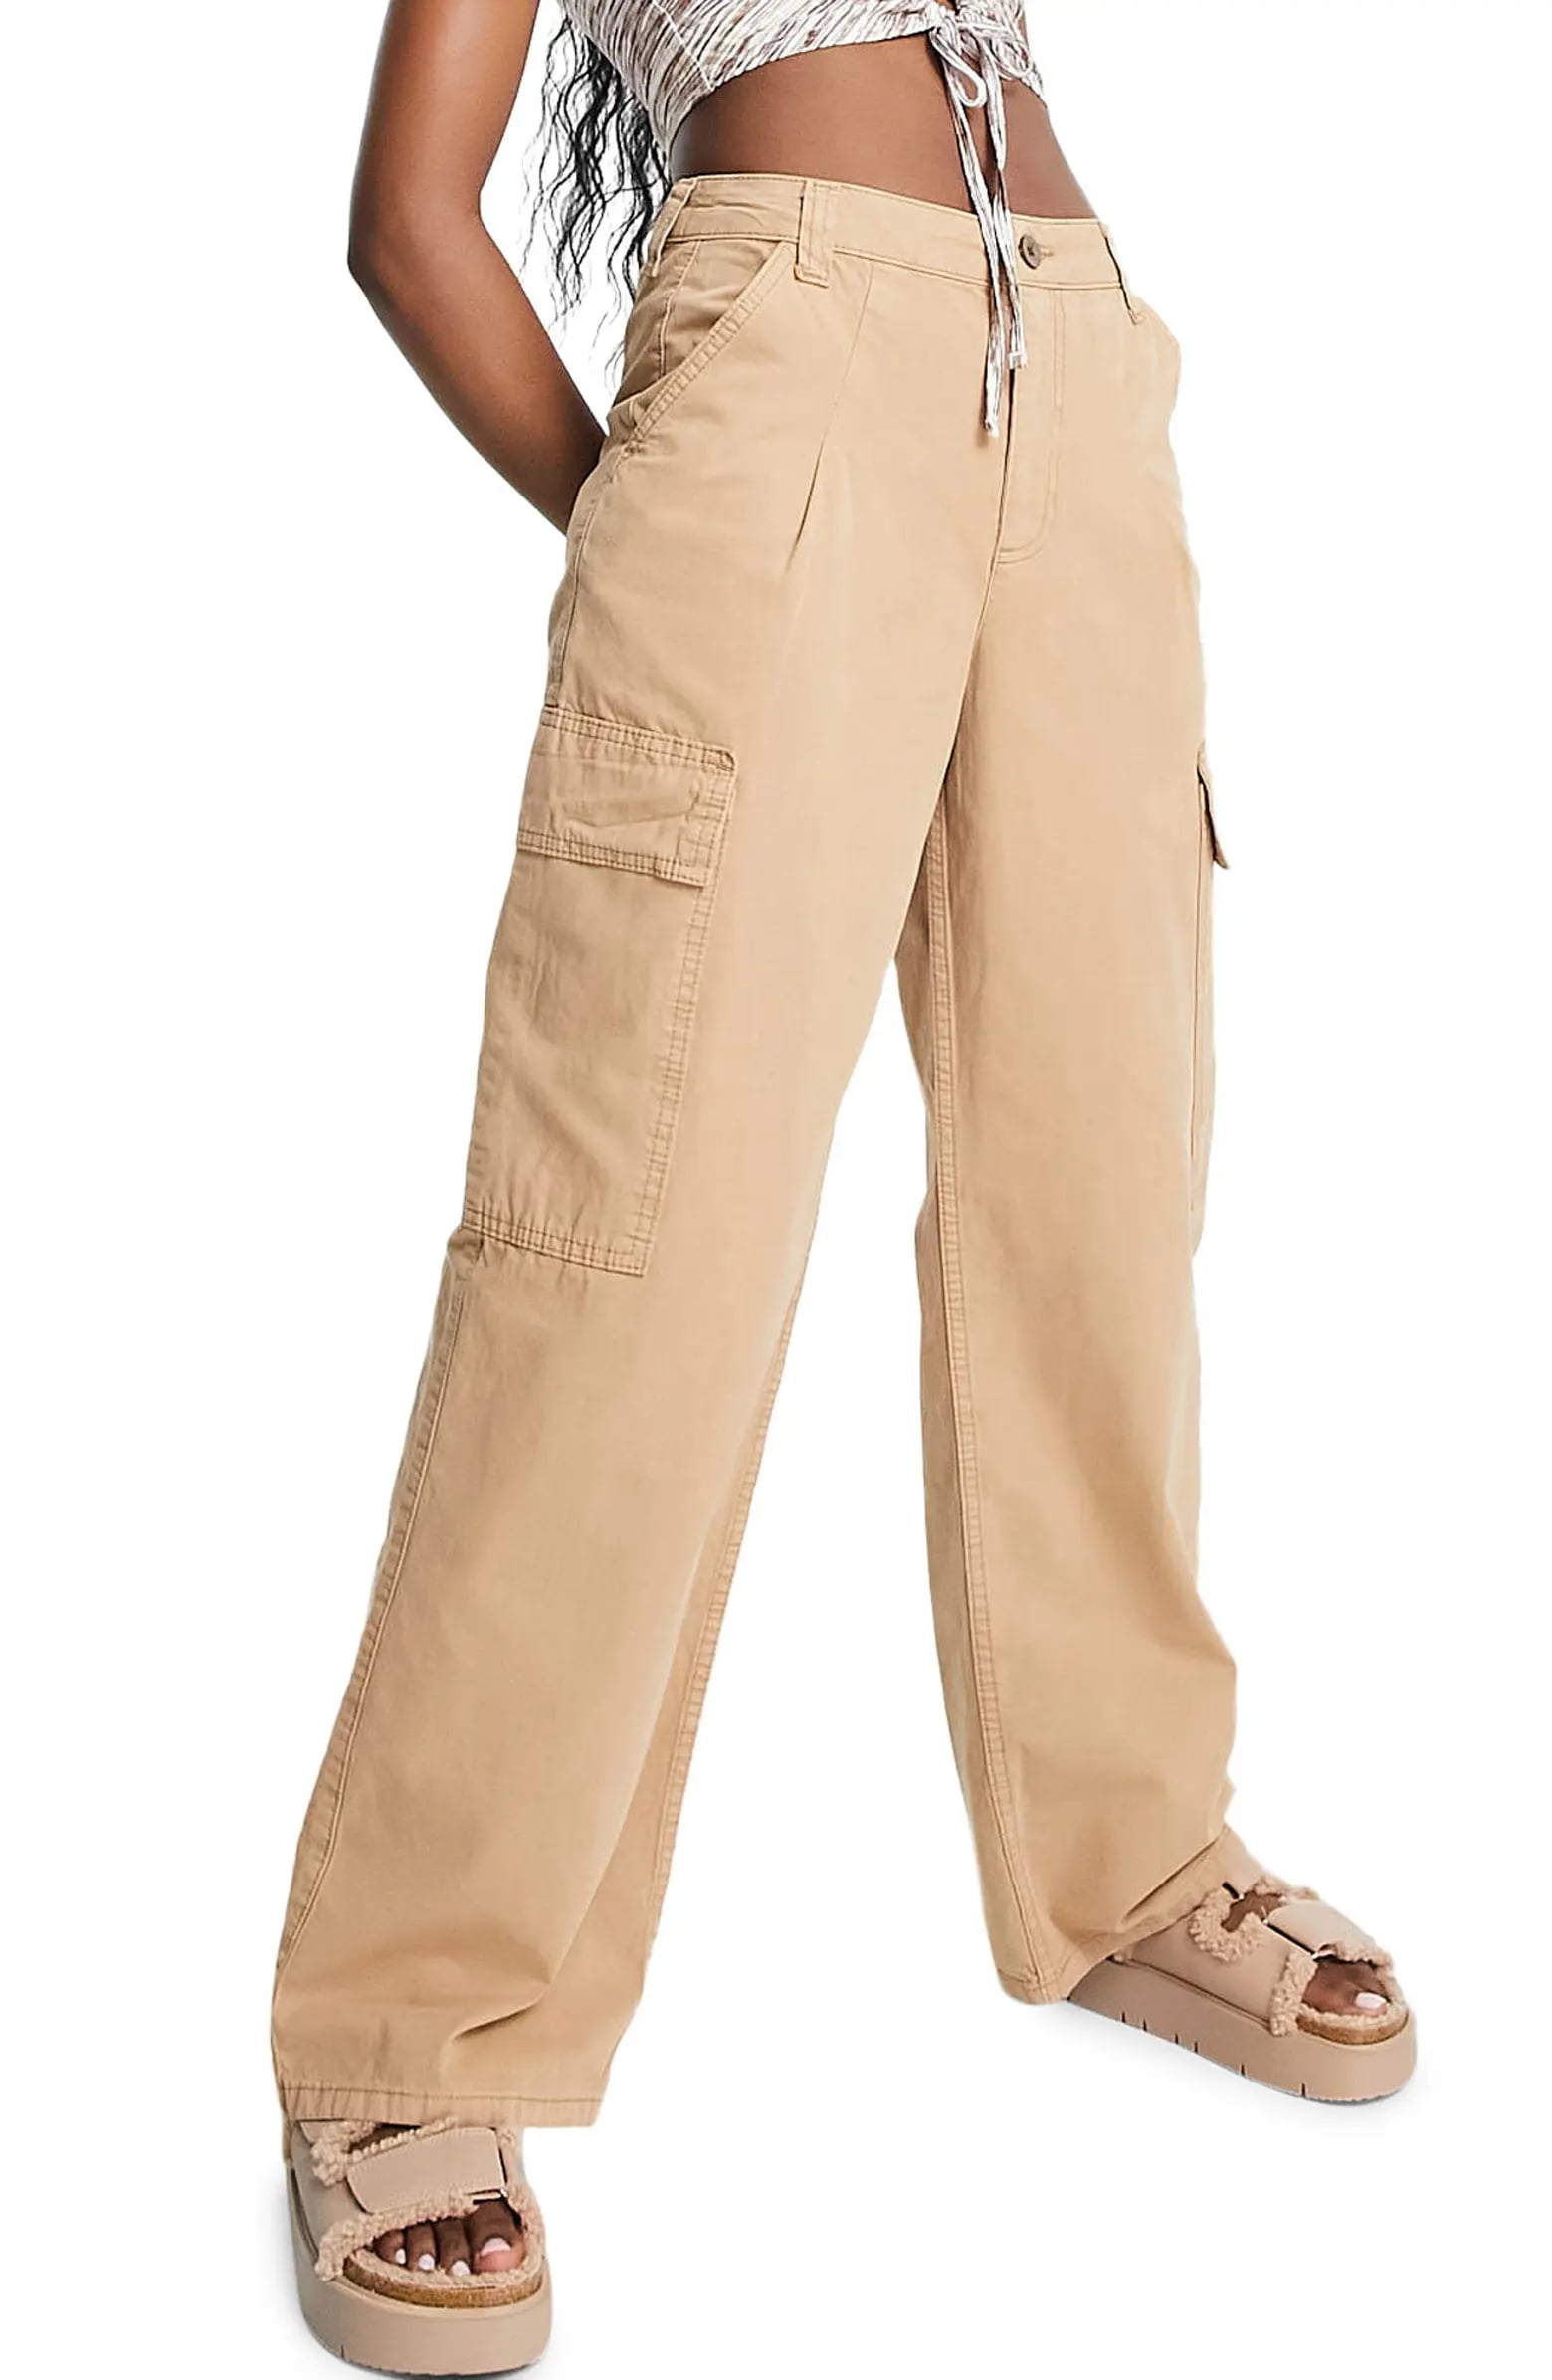 Ruched cargo pants tomato red | Trendy Pants - Lush Fashion Lounge